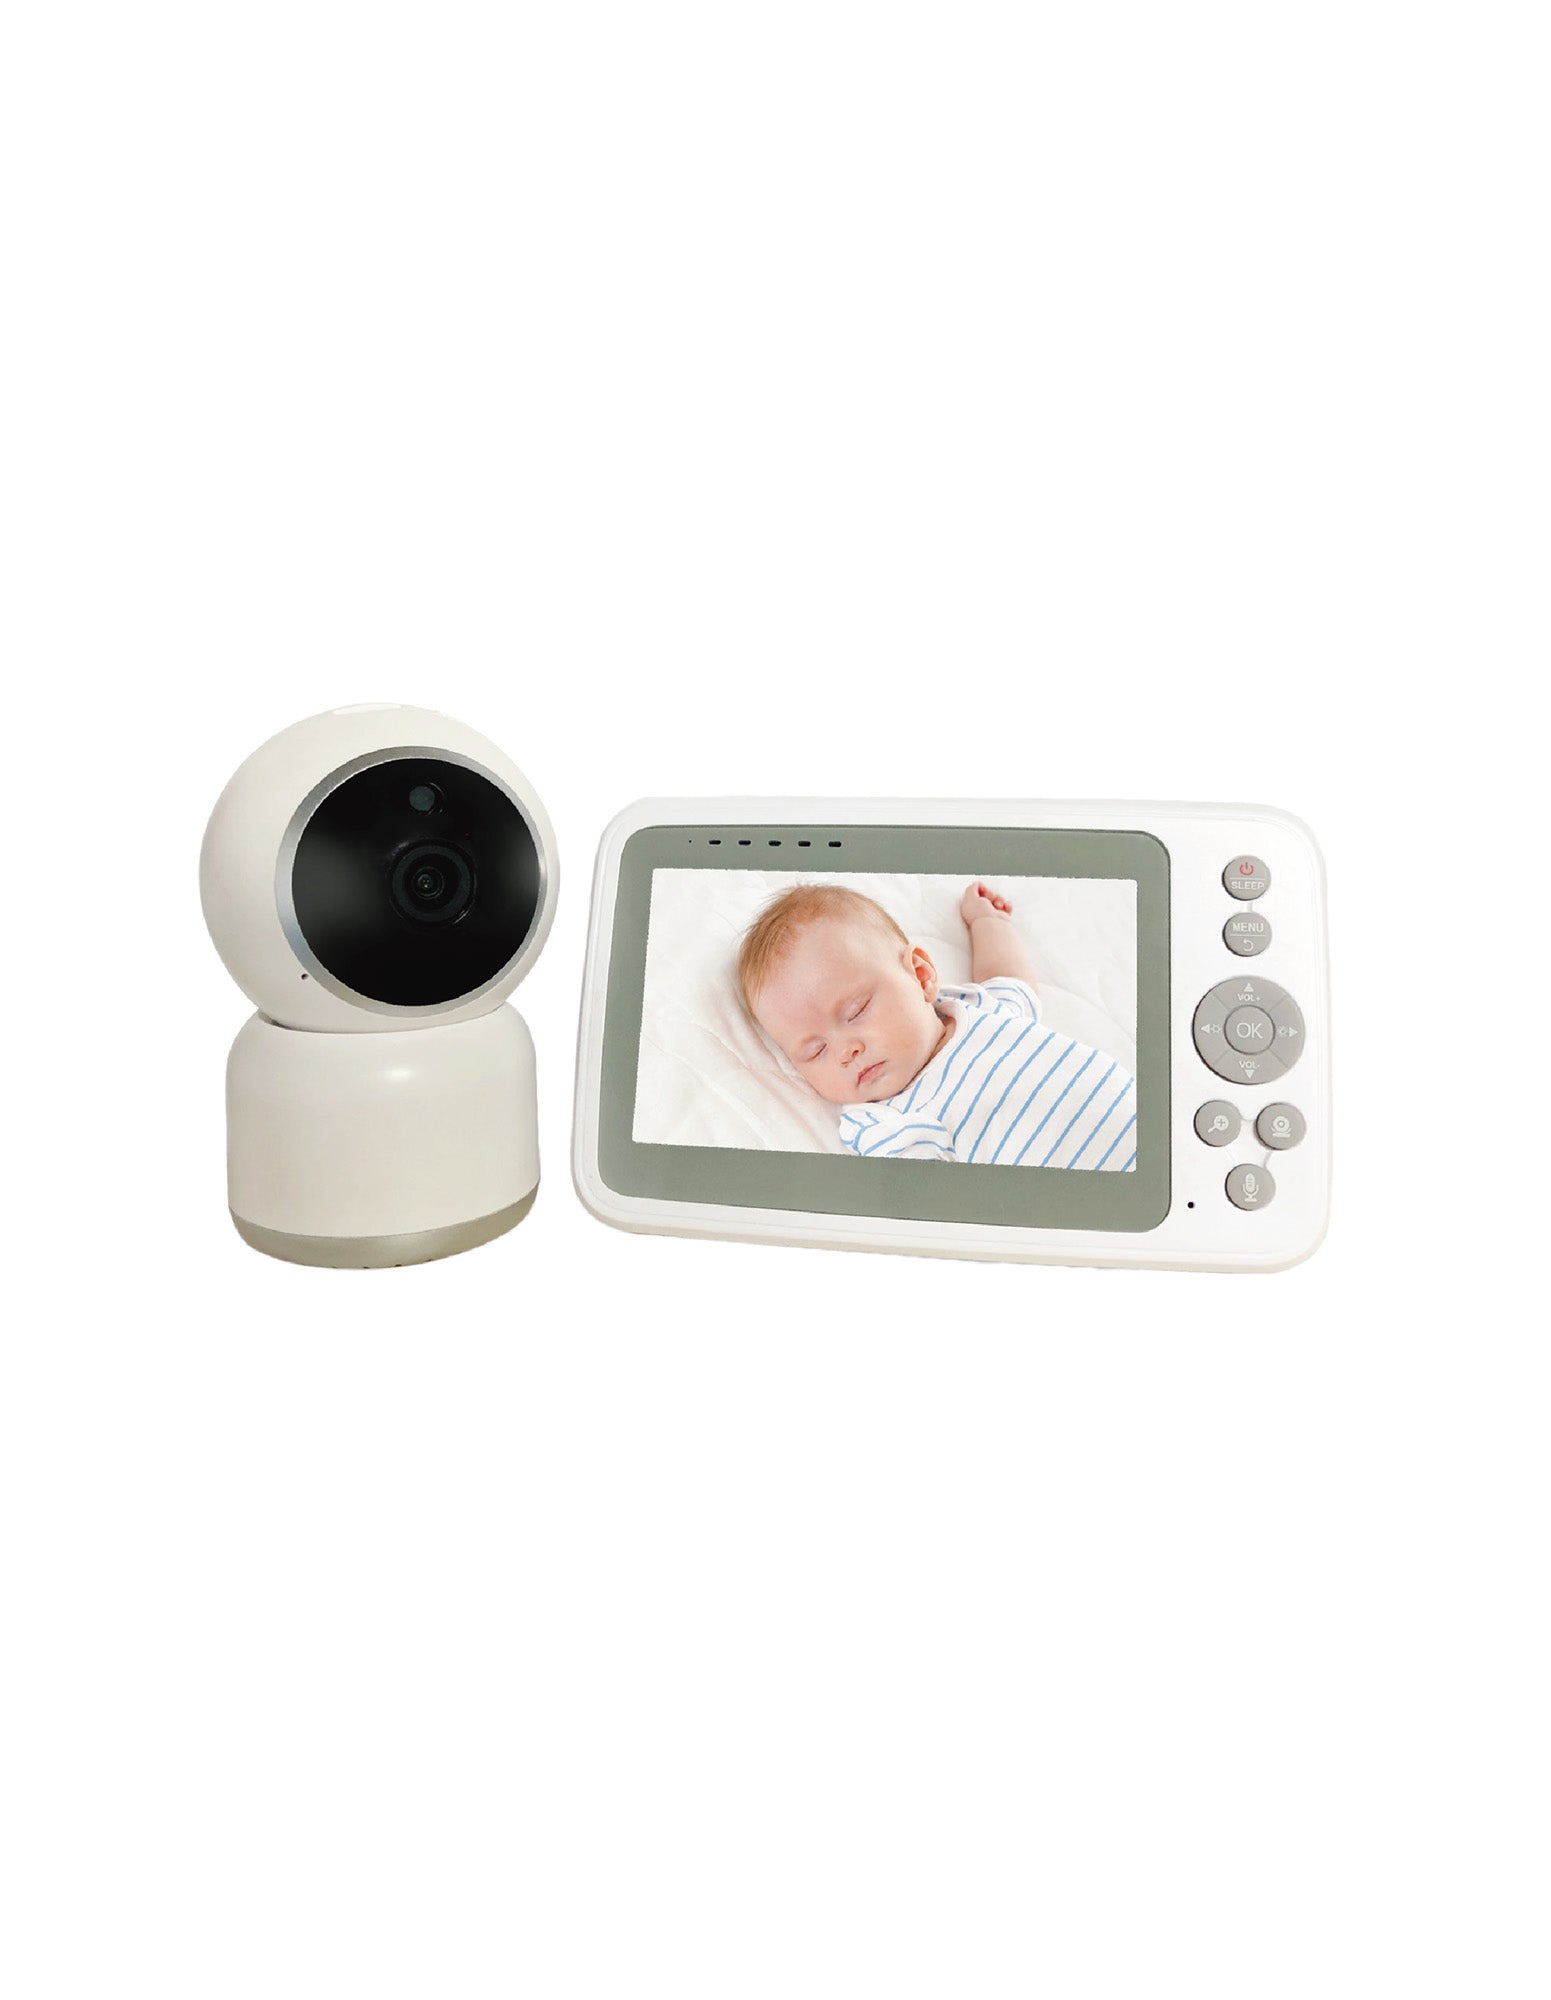 Notto - 4.3'/10.9cm Crystal Clear Baby Monitor